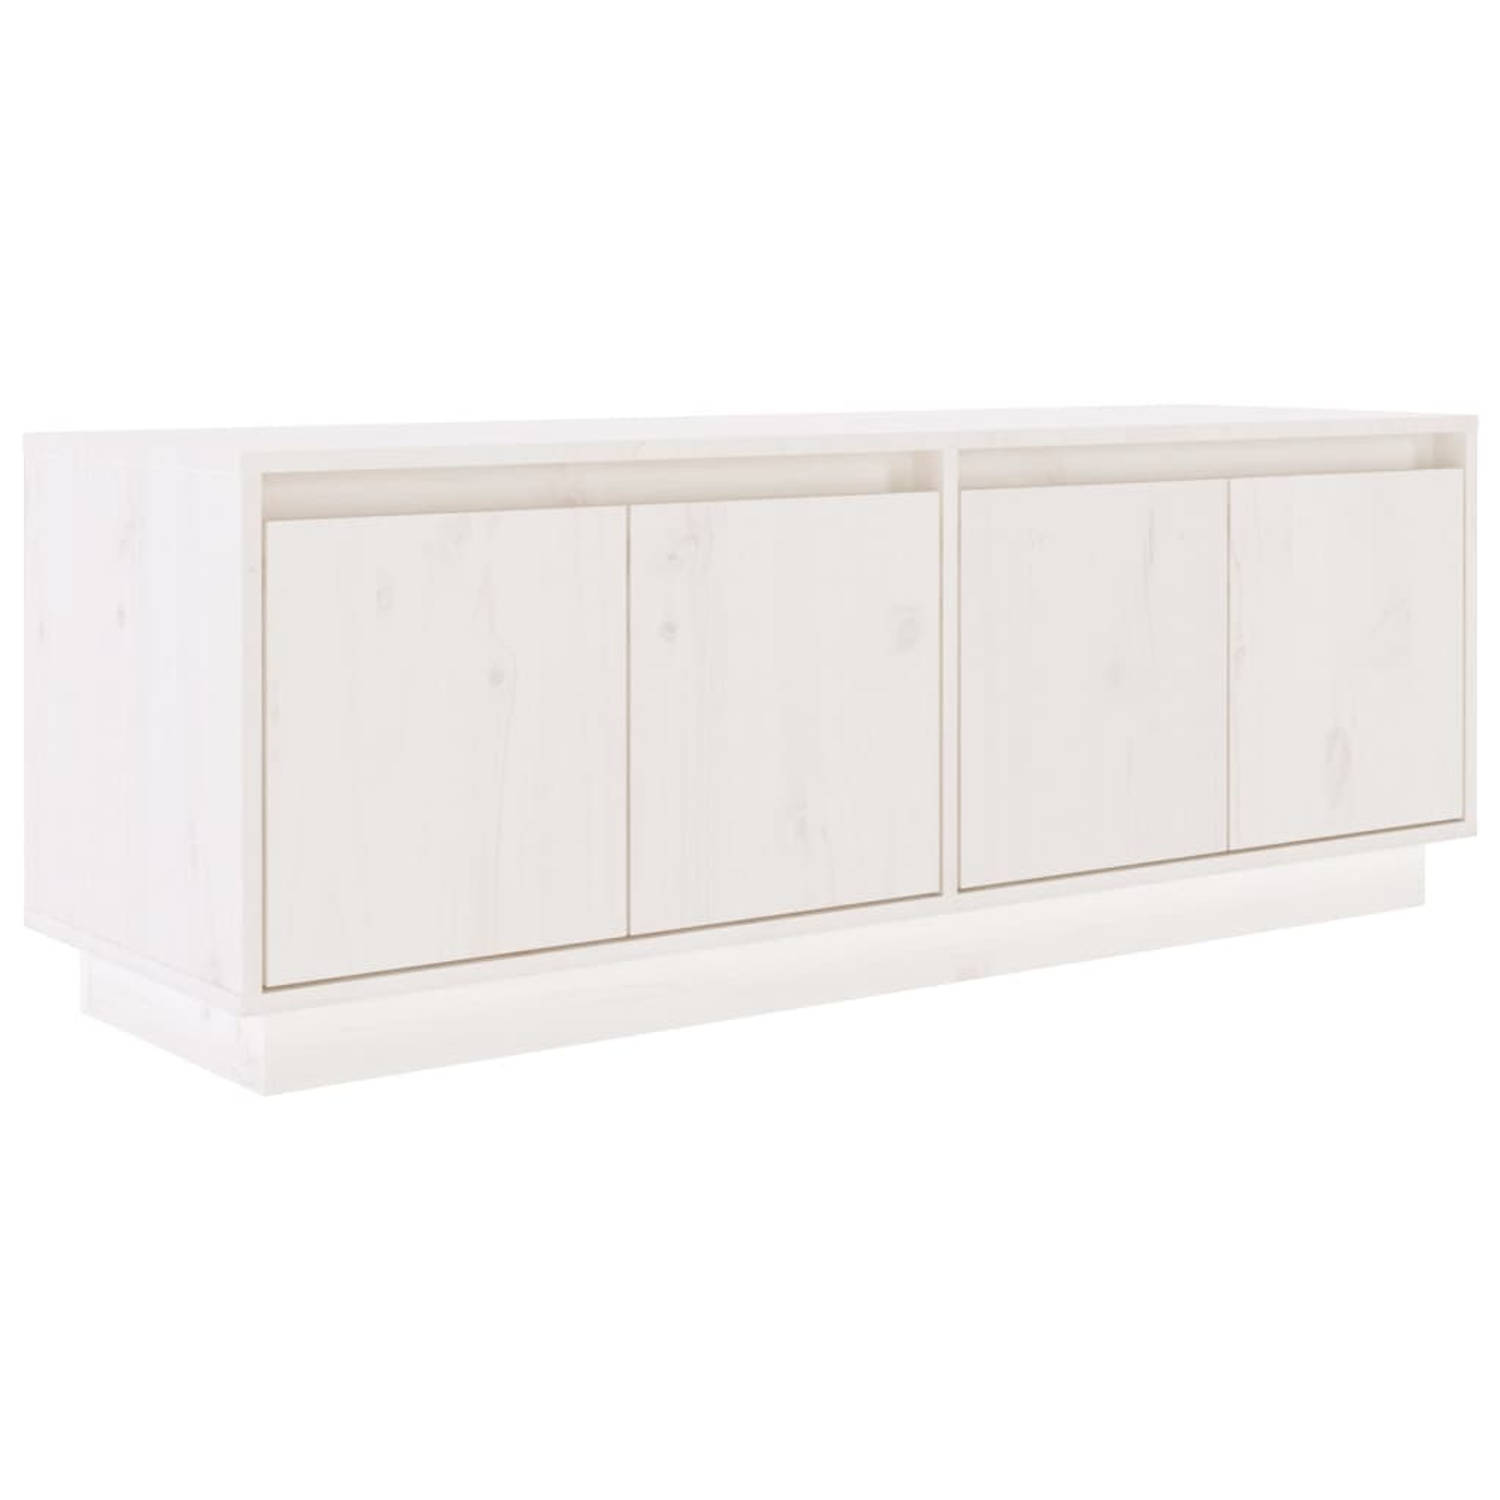 The Living Store TV-meubel - Massief grenenhout - 110 x 34 x 40 cm - Wit